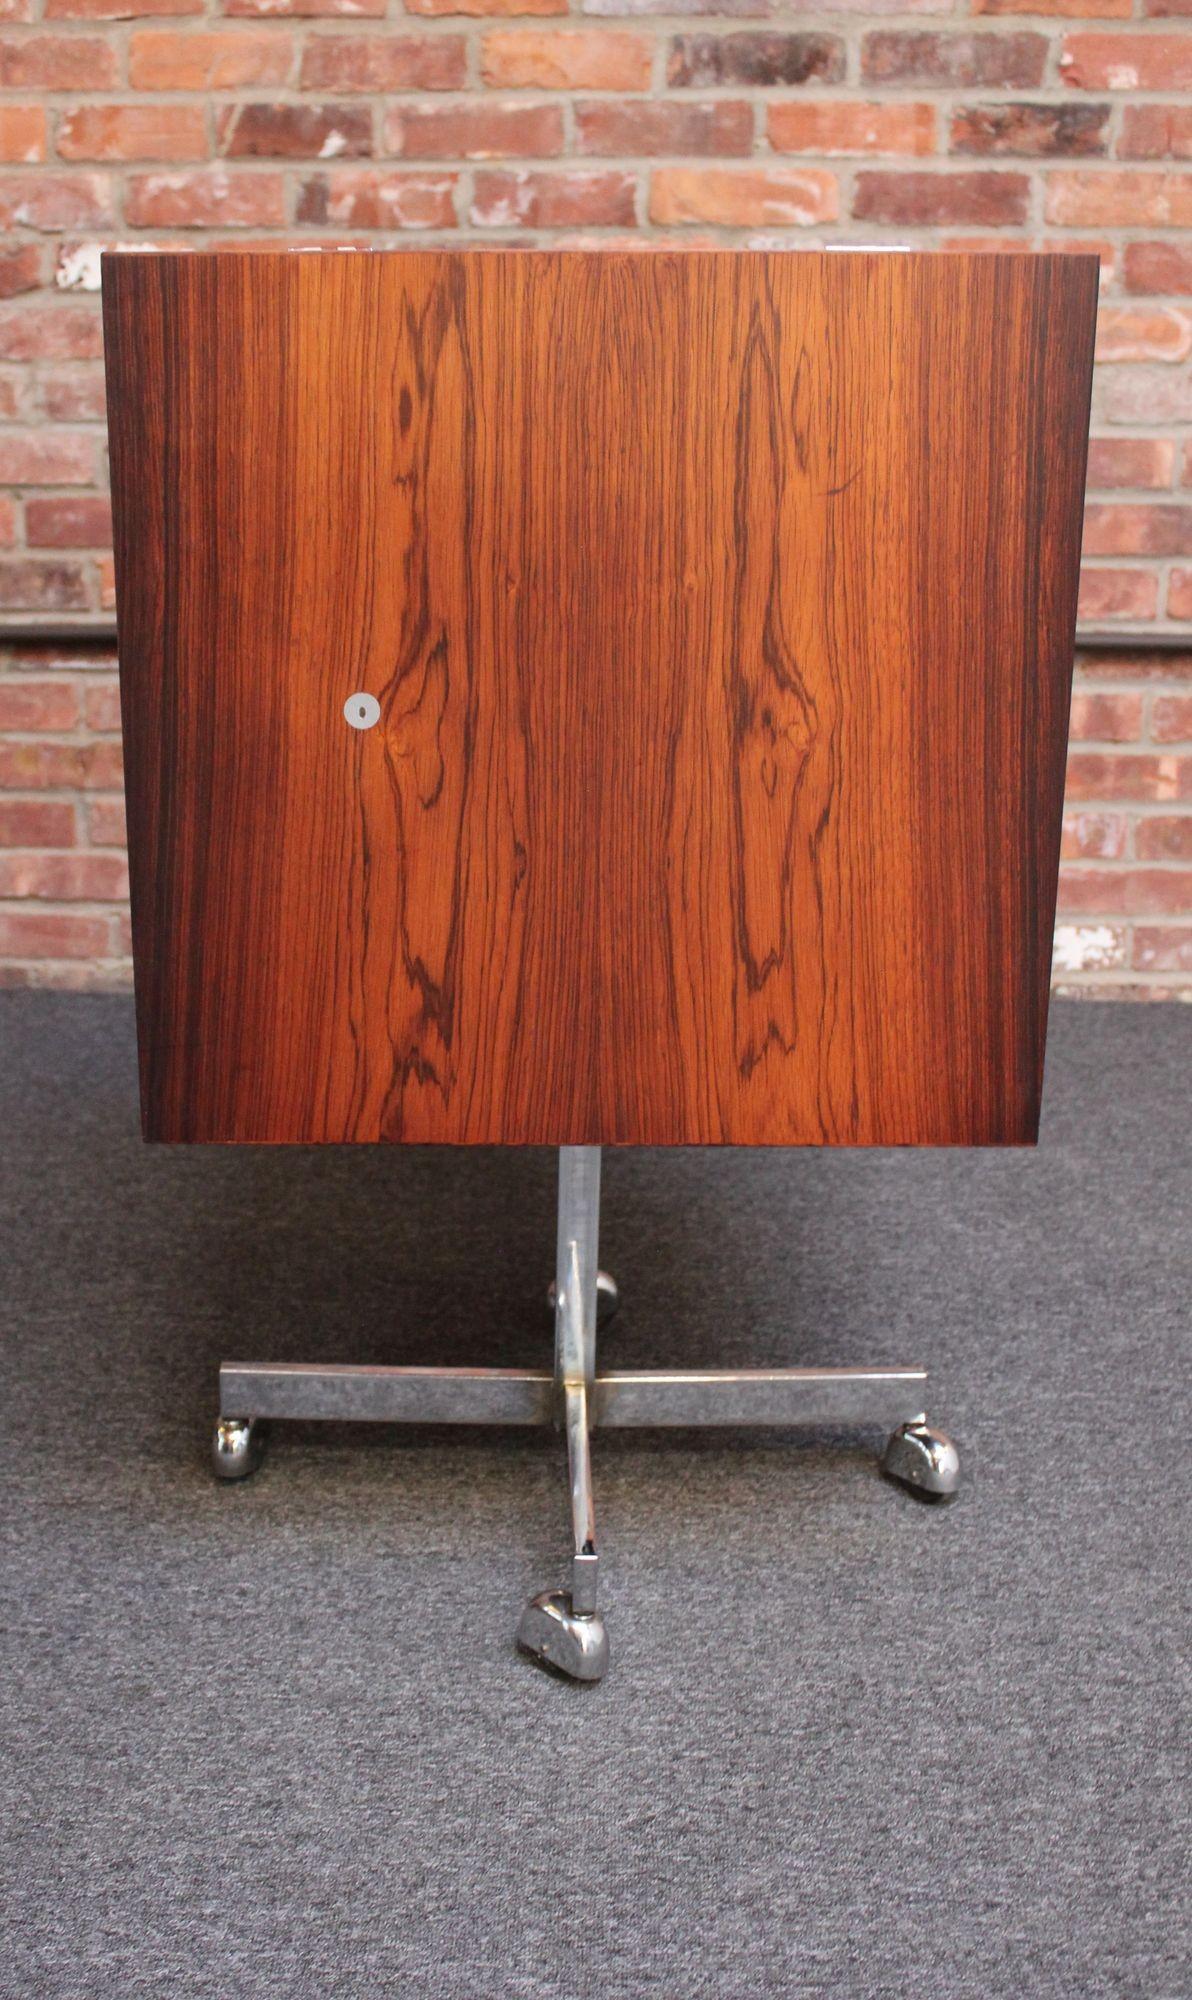 Rosewood dry bar supported by chrome base with caster wheels designed by Poul Nørreklit for Georg Petersens Møbelfabrik (ca. 1960s, Denmark).
Ingenious design featuring a spring-loaded mechanism which raises the cube roughly 10